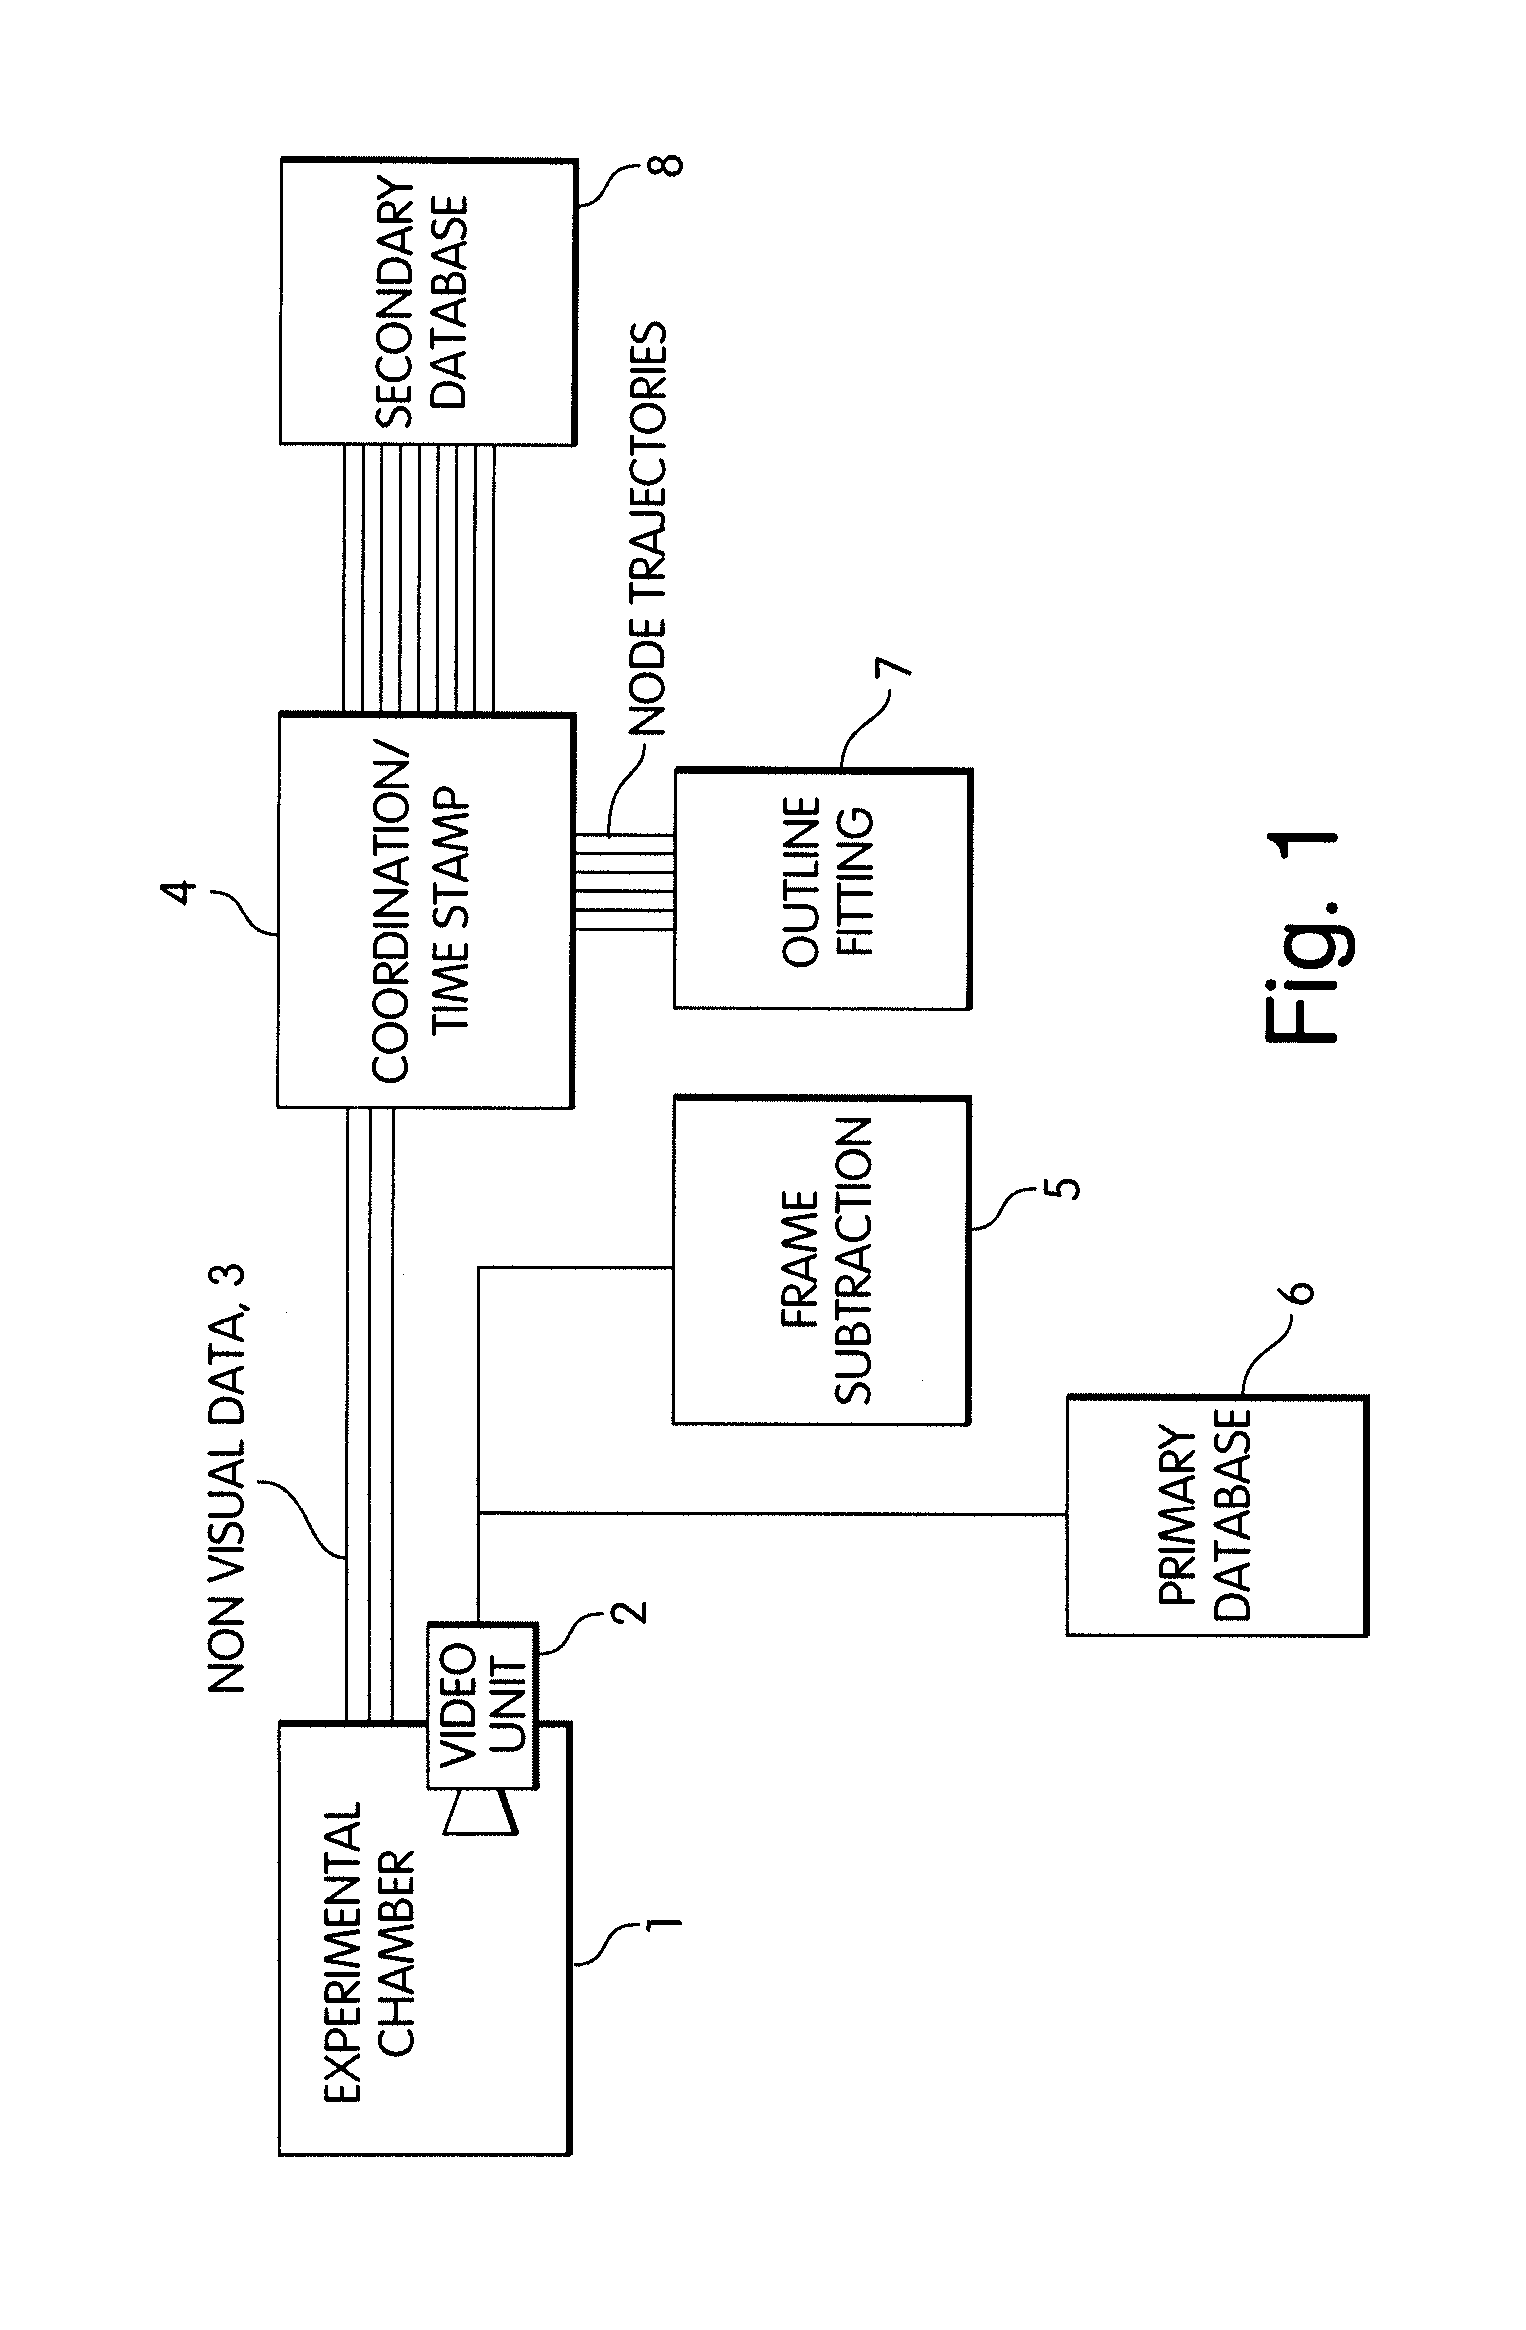 Systems and methods for monitoring behavior informatics